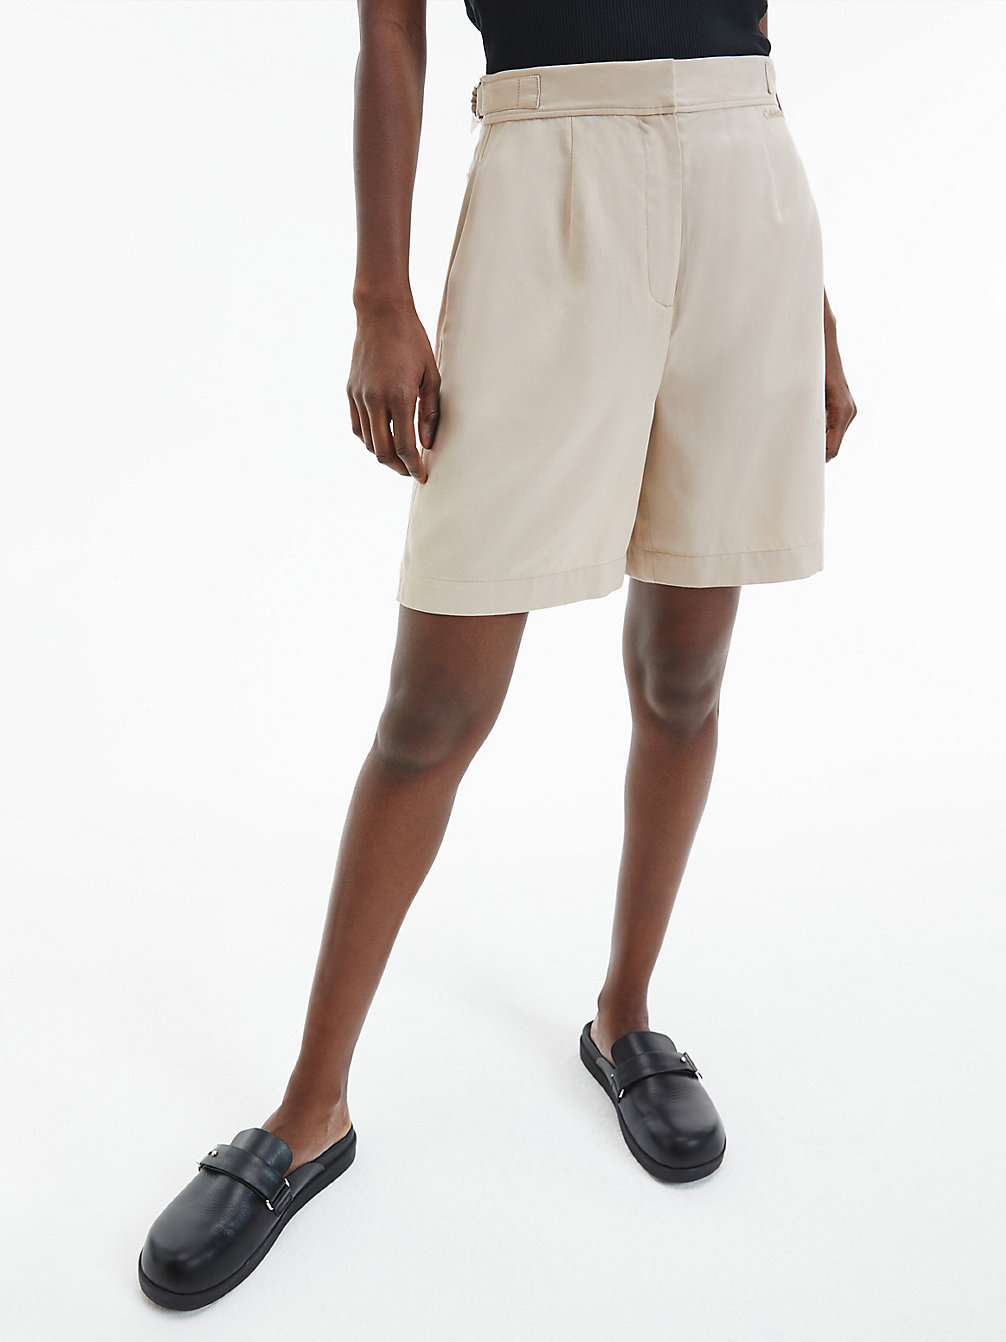 Shorts Tailored De Sarga Suave > MOCCASIN > undefined mujer > Calvin Klein